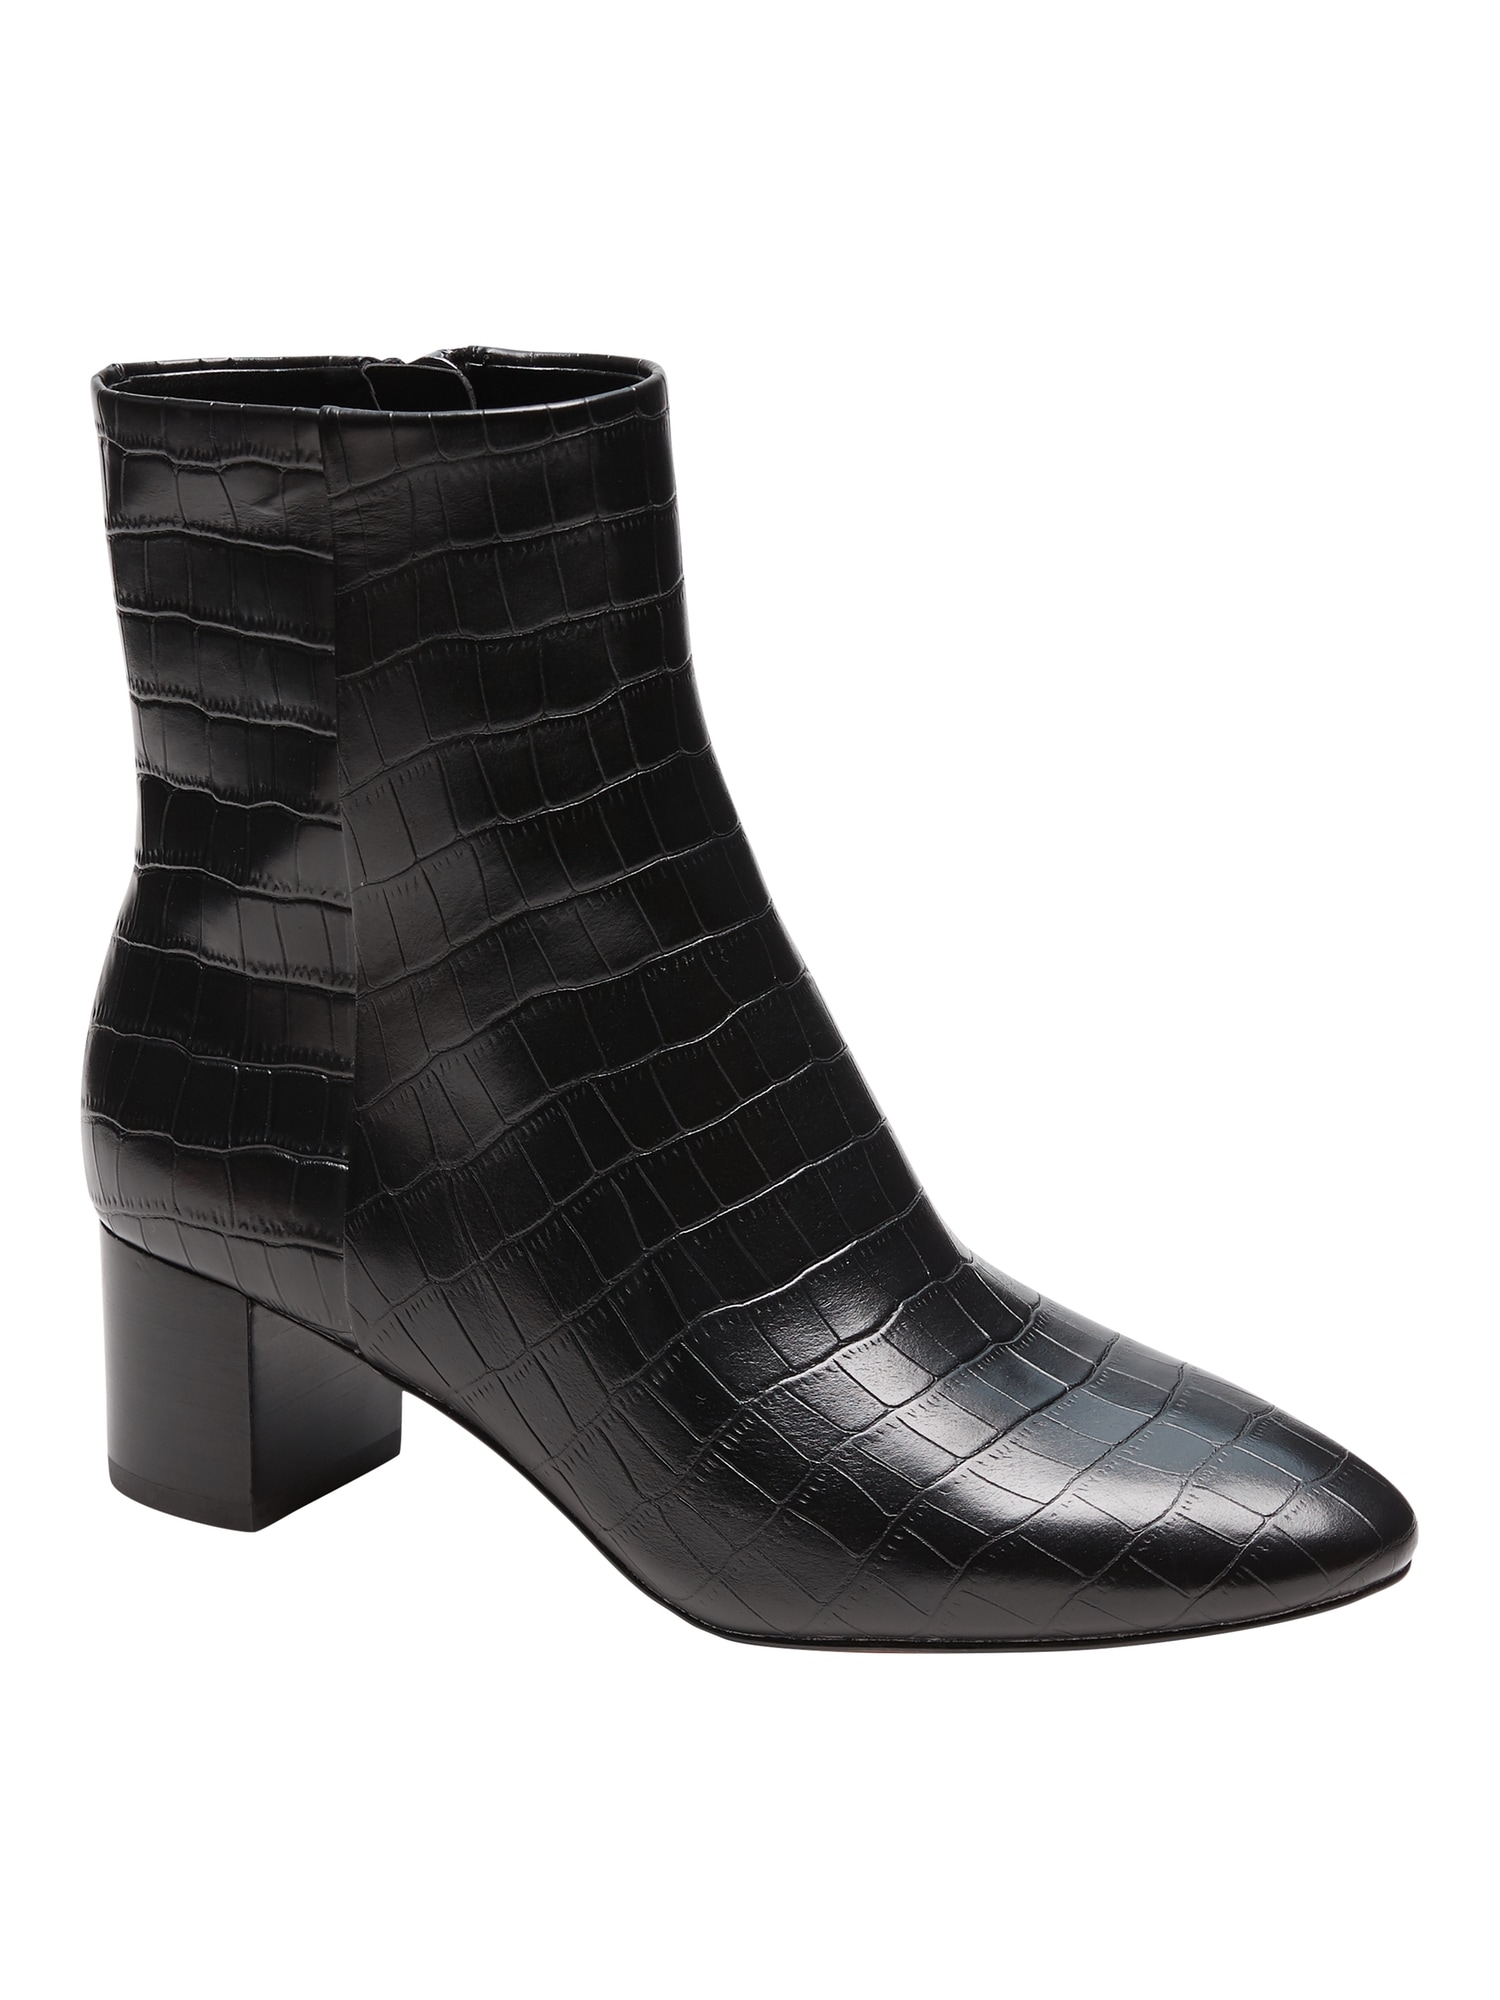 banana republic ankle boots